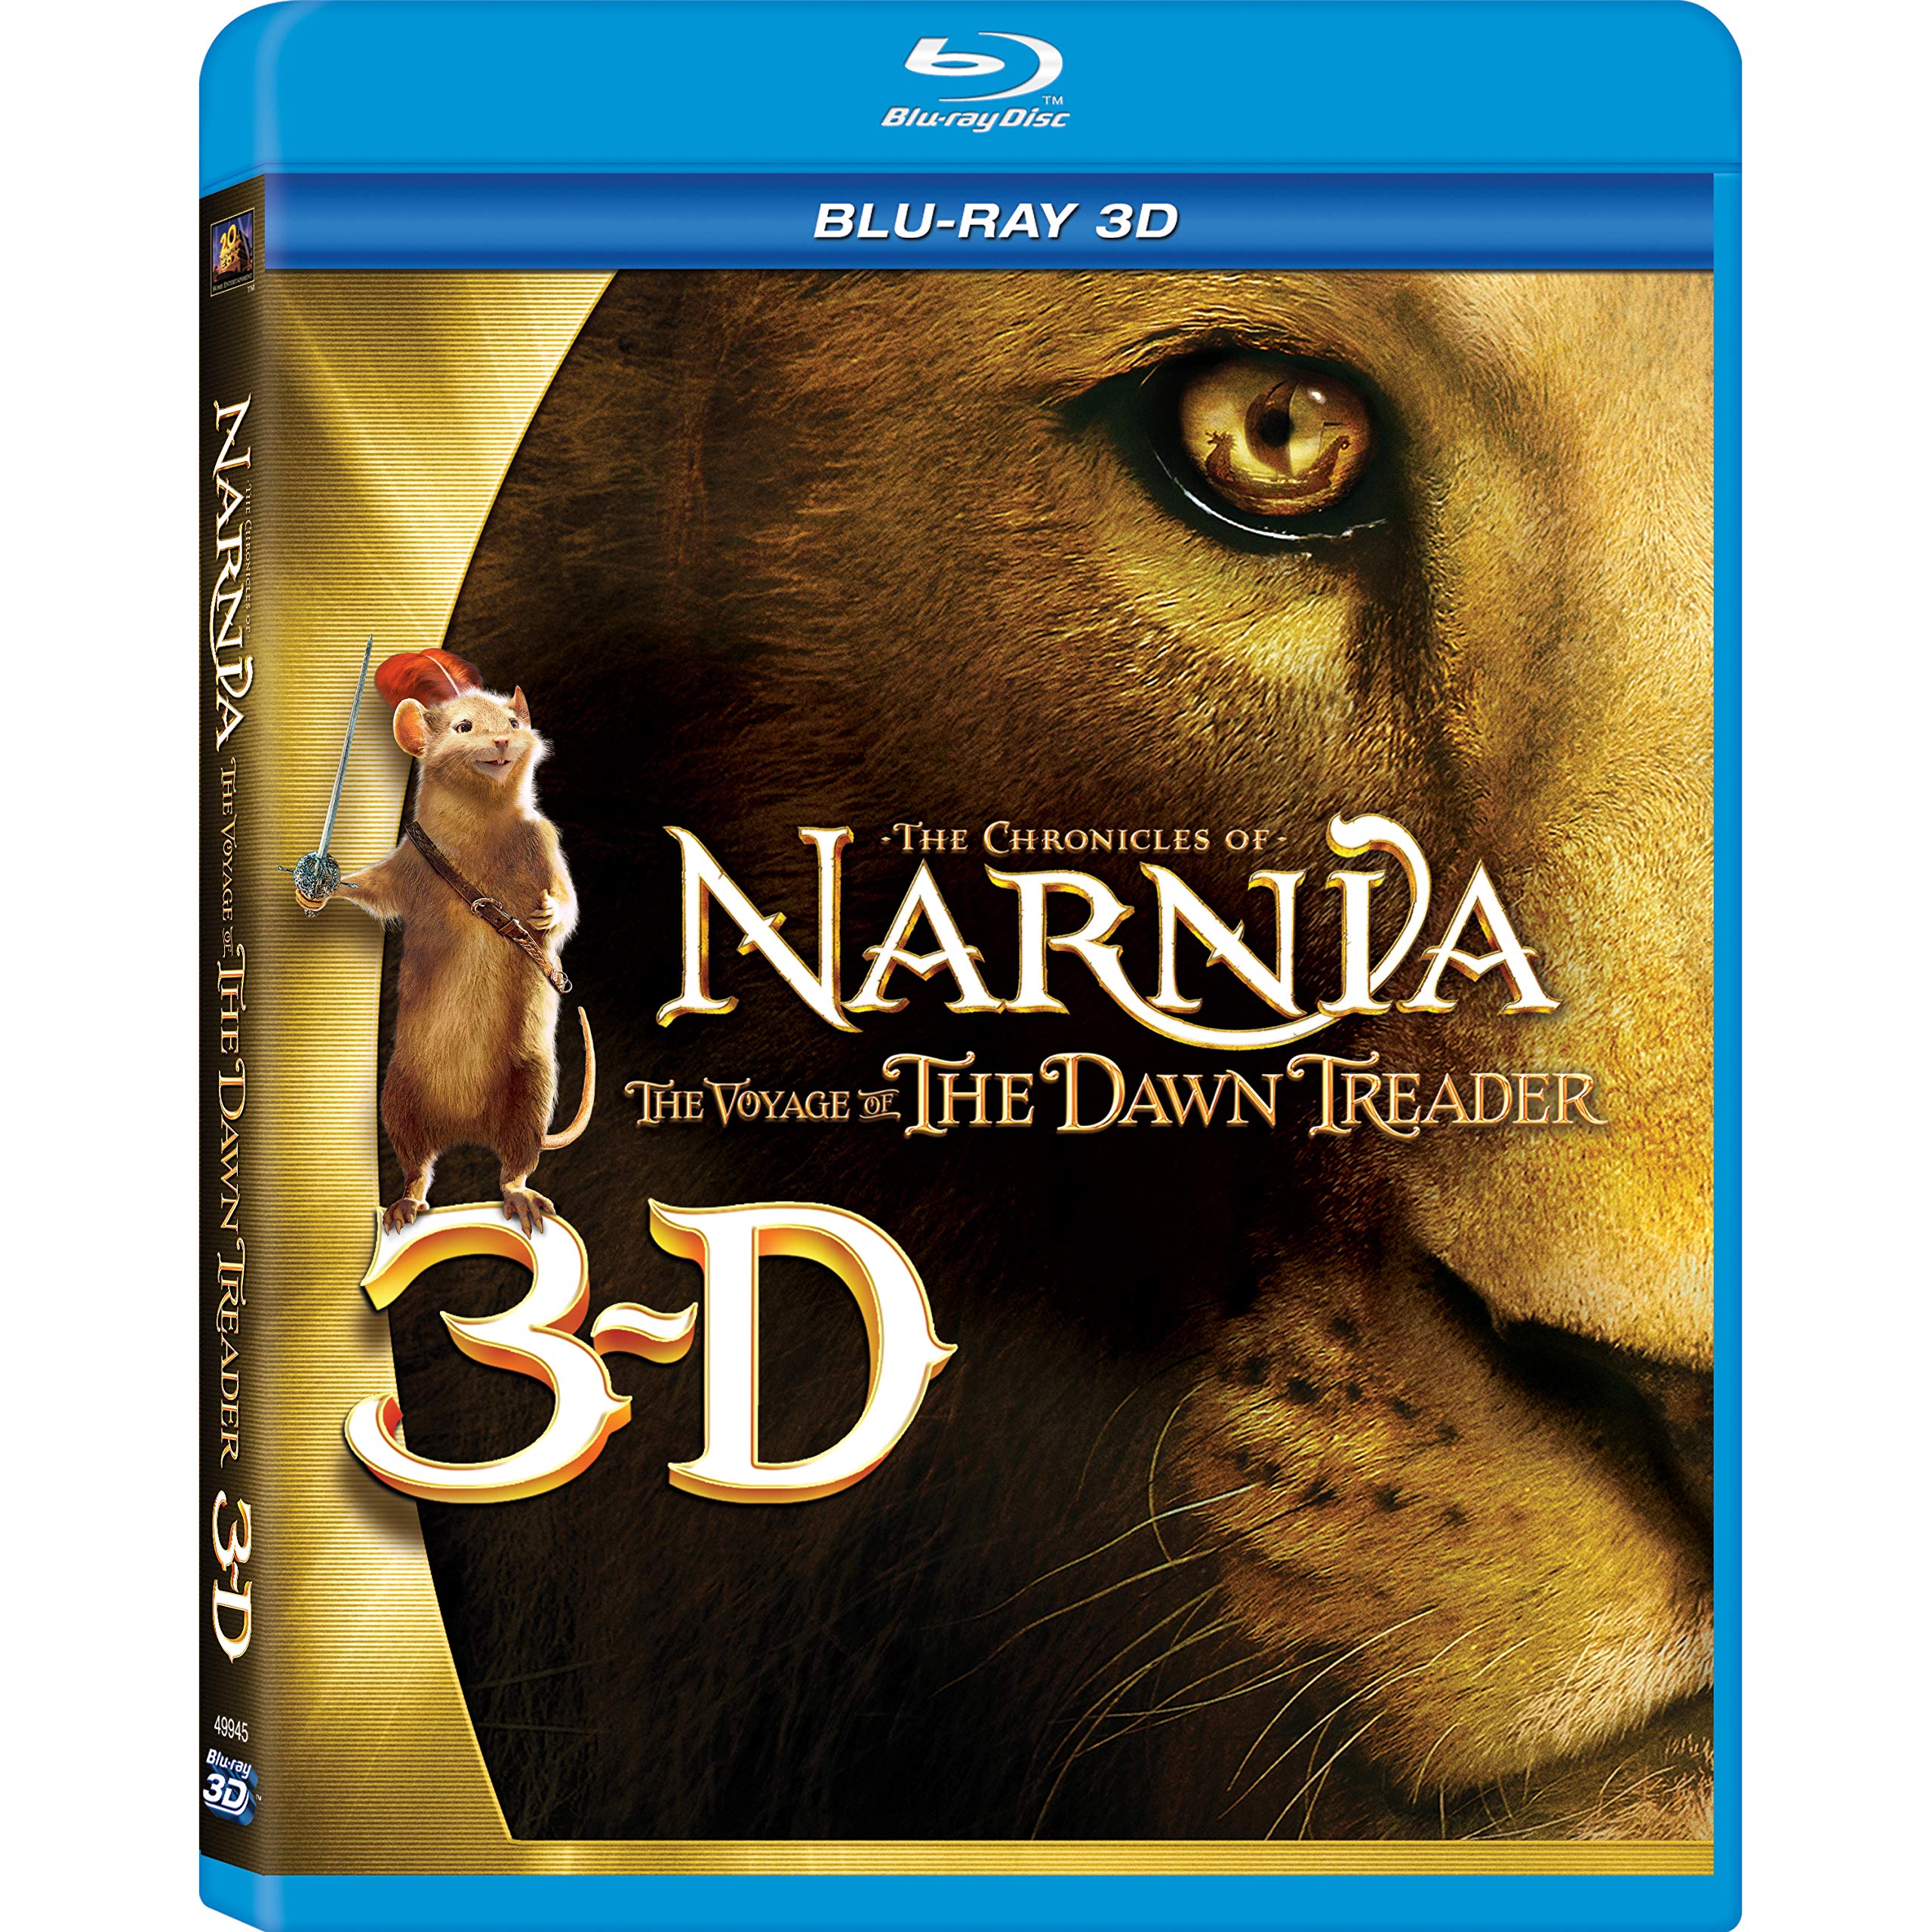 the-chronicles-of-narnia-the-voyage-of-the-dawn-treader-blu-ray-3d